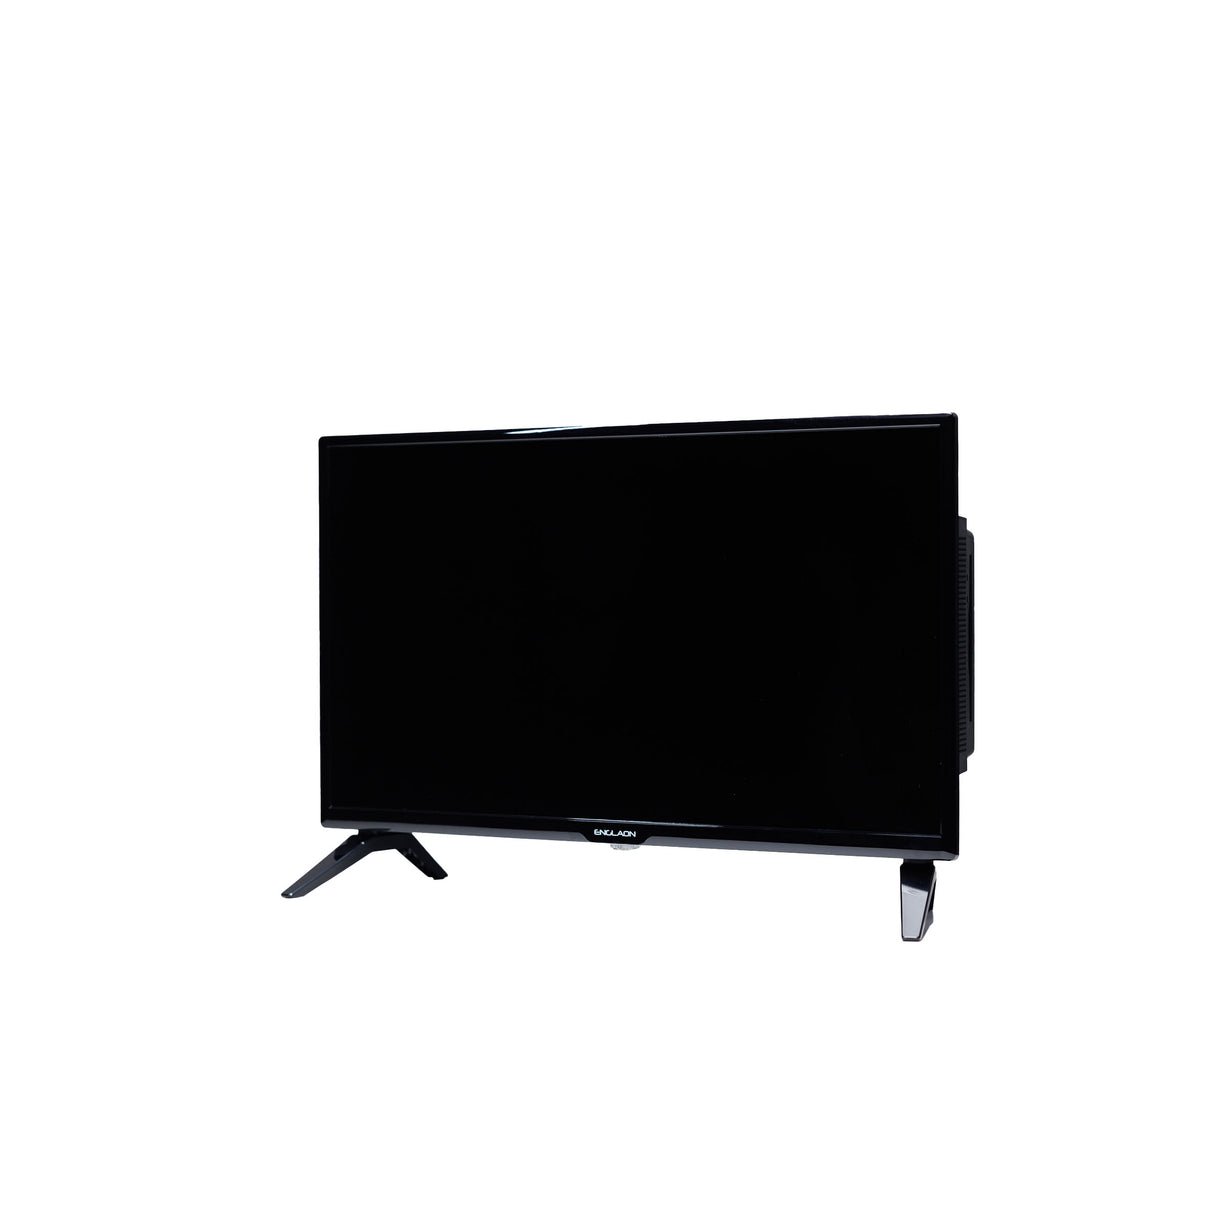 ENGLAON 24″ HD LED 12V TV with Built-in DVD player